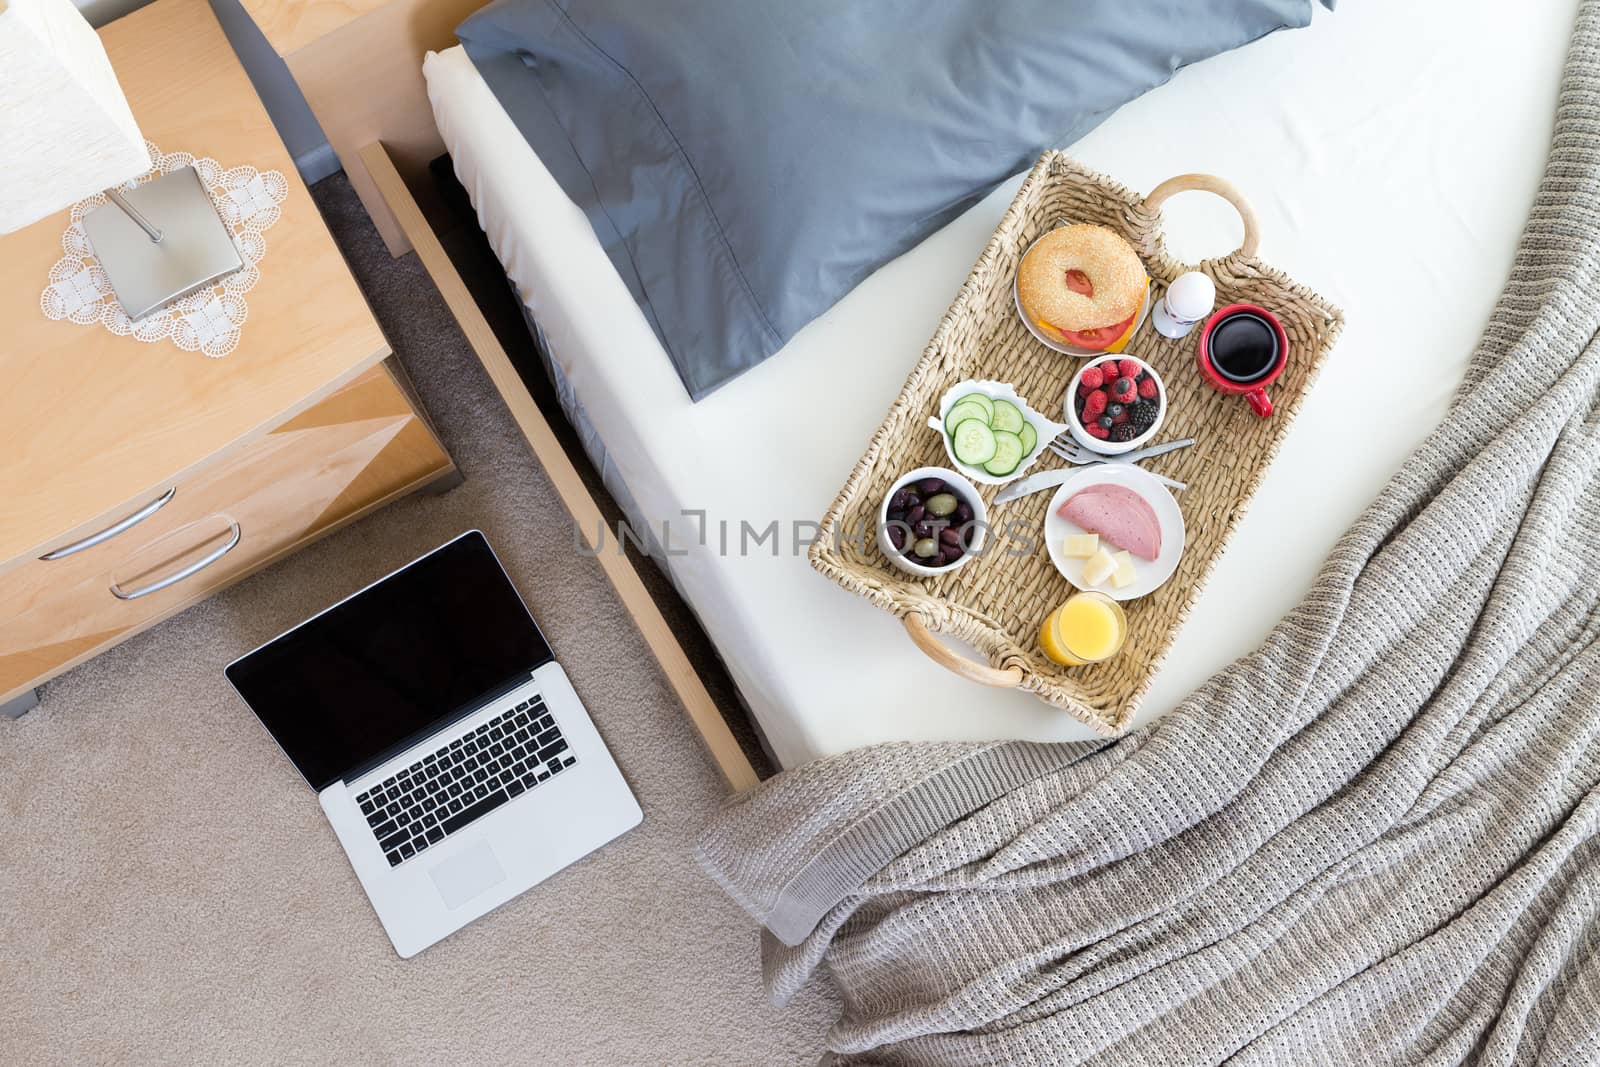 High Angle View of Open Laptop on Floor Beside Unmade Bed in Hotel Room with Wicker Breakfast Tray